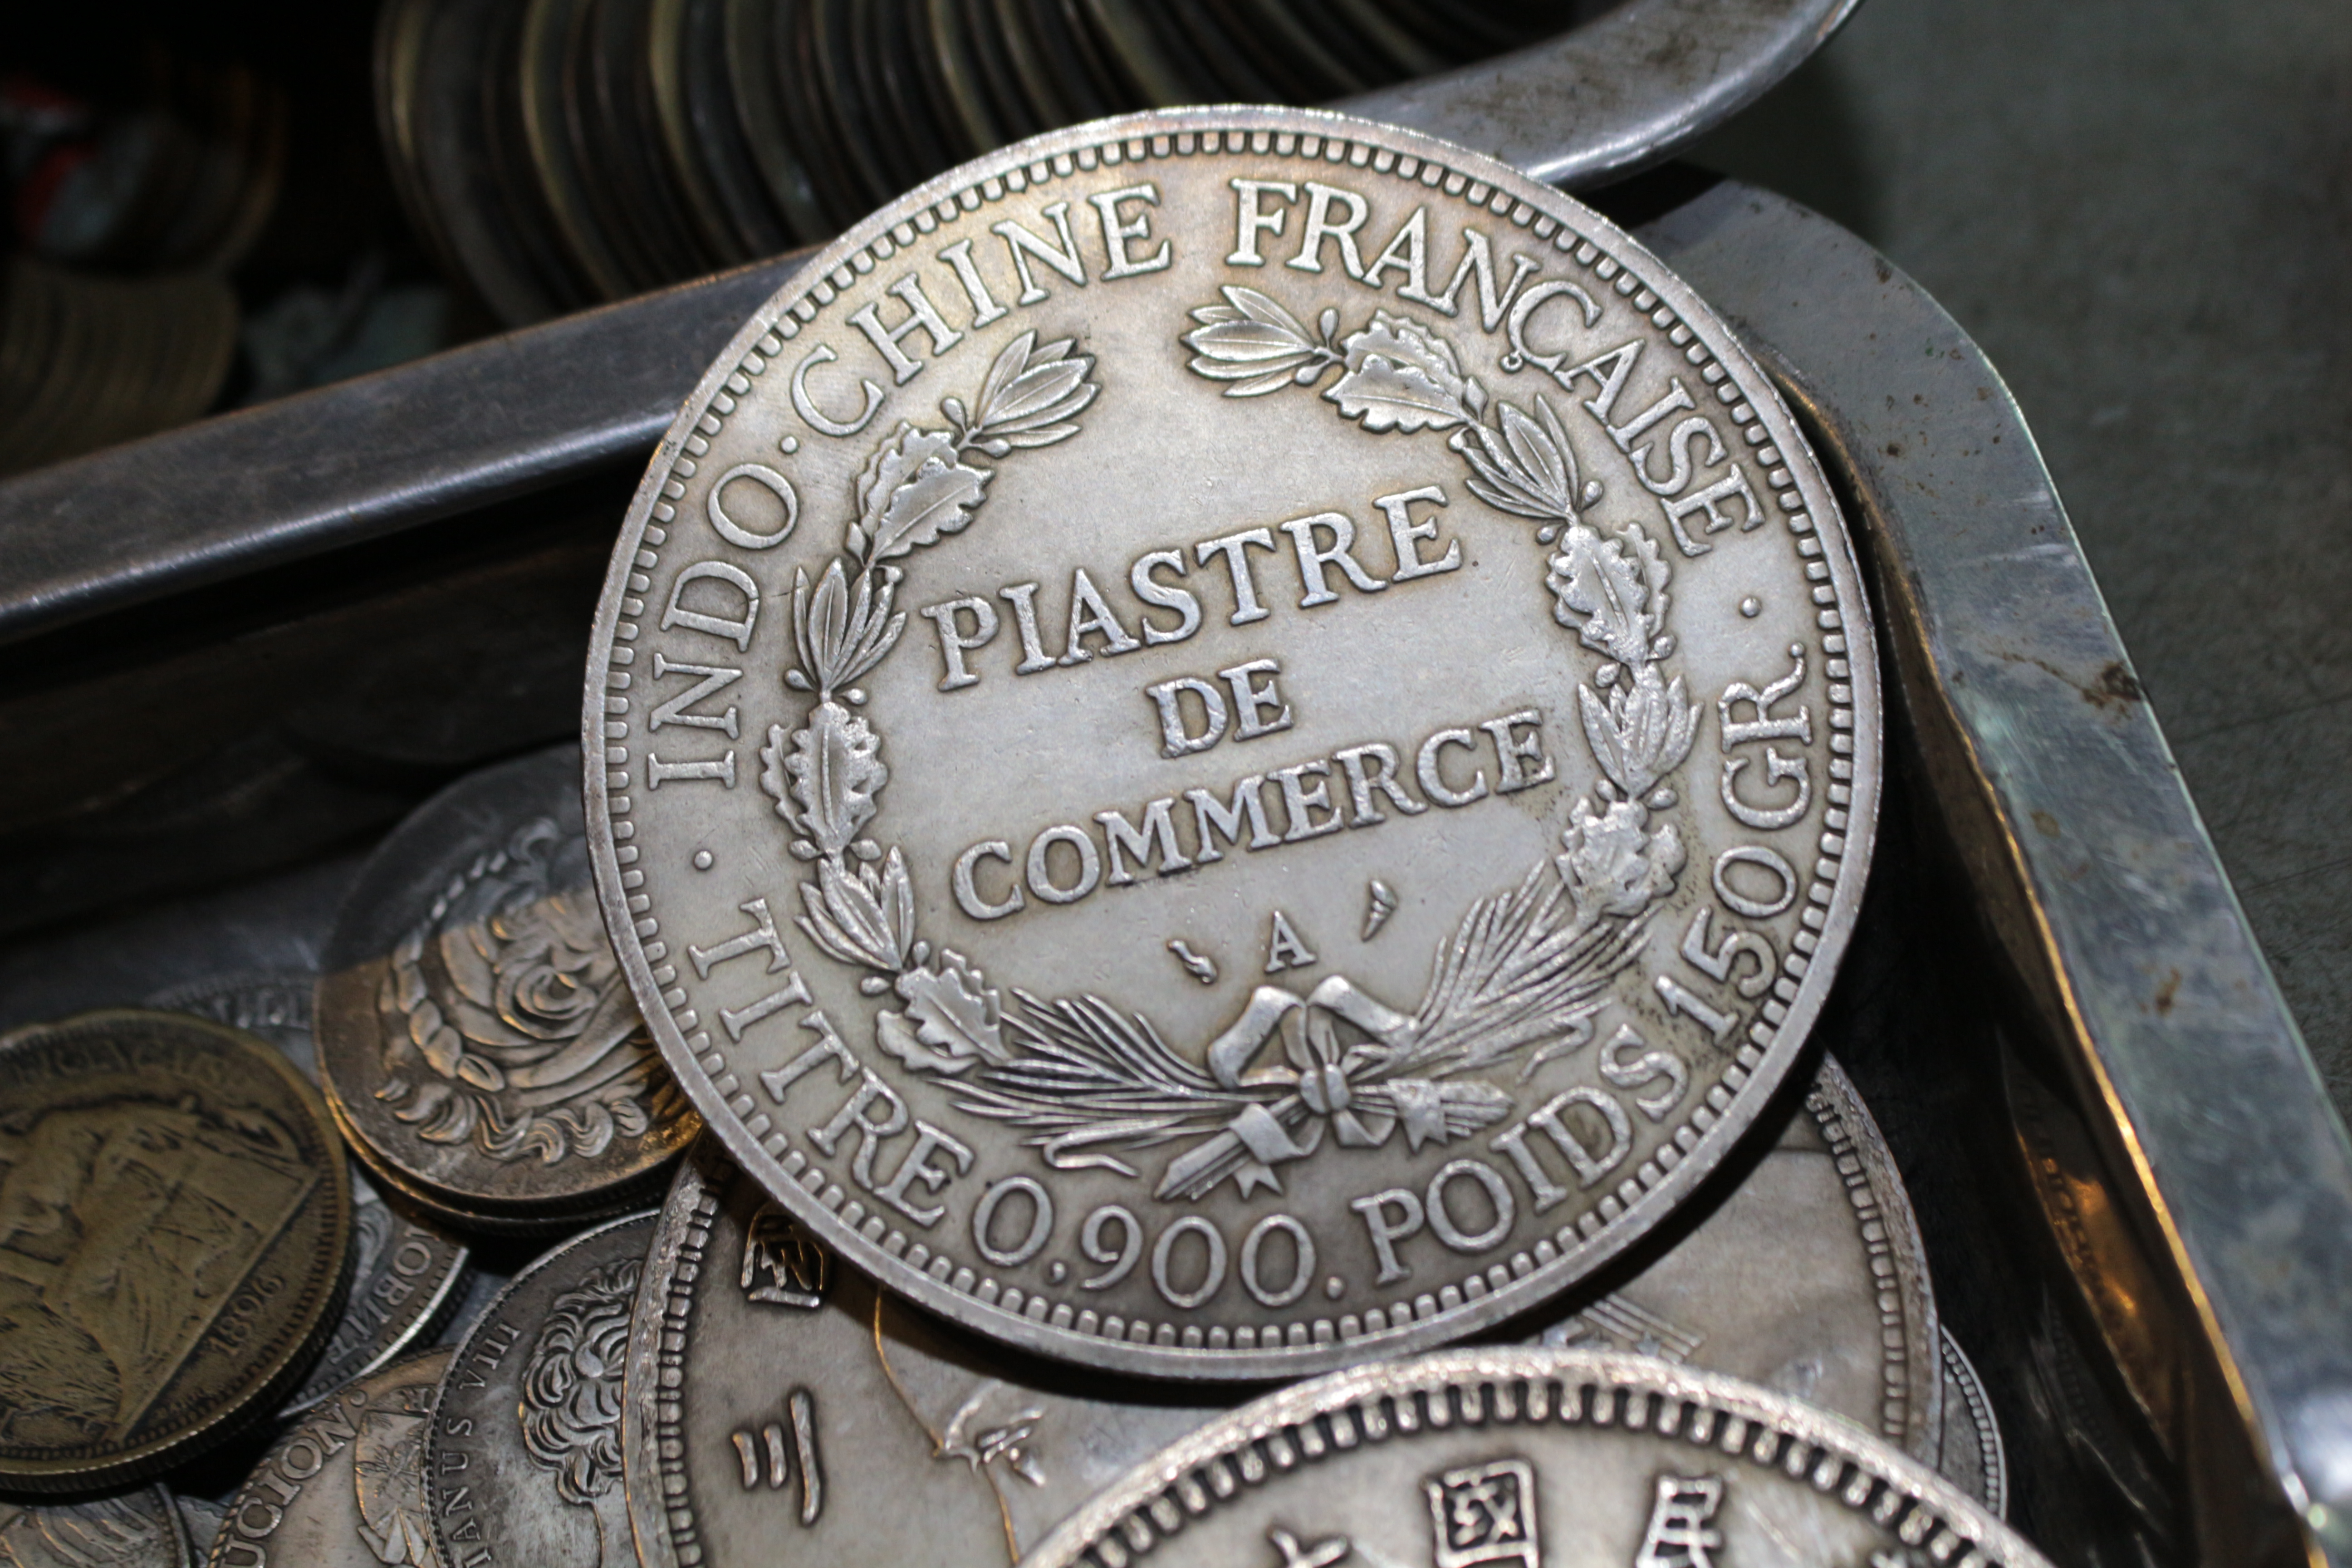 Old coins are sold at Cafe Chợ Đồ Cổ in Binh Thanh District, Ho Chi Minh City. Photo: Ray Kuschert